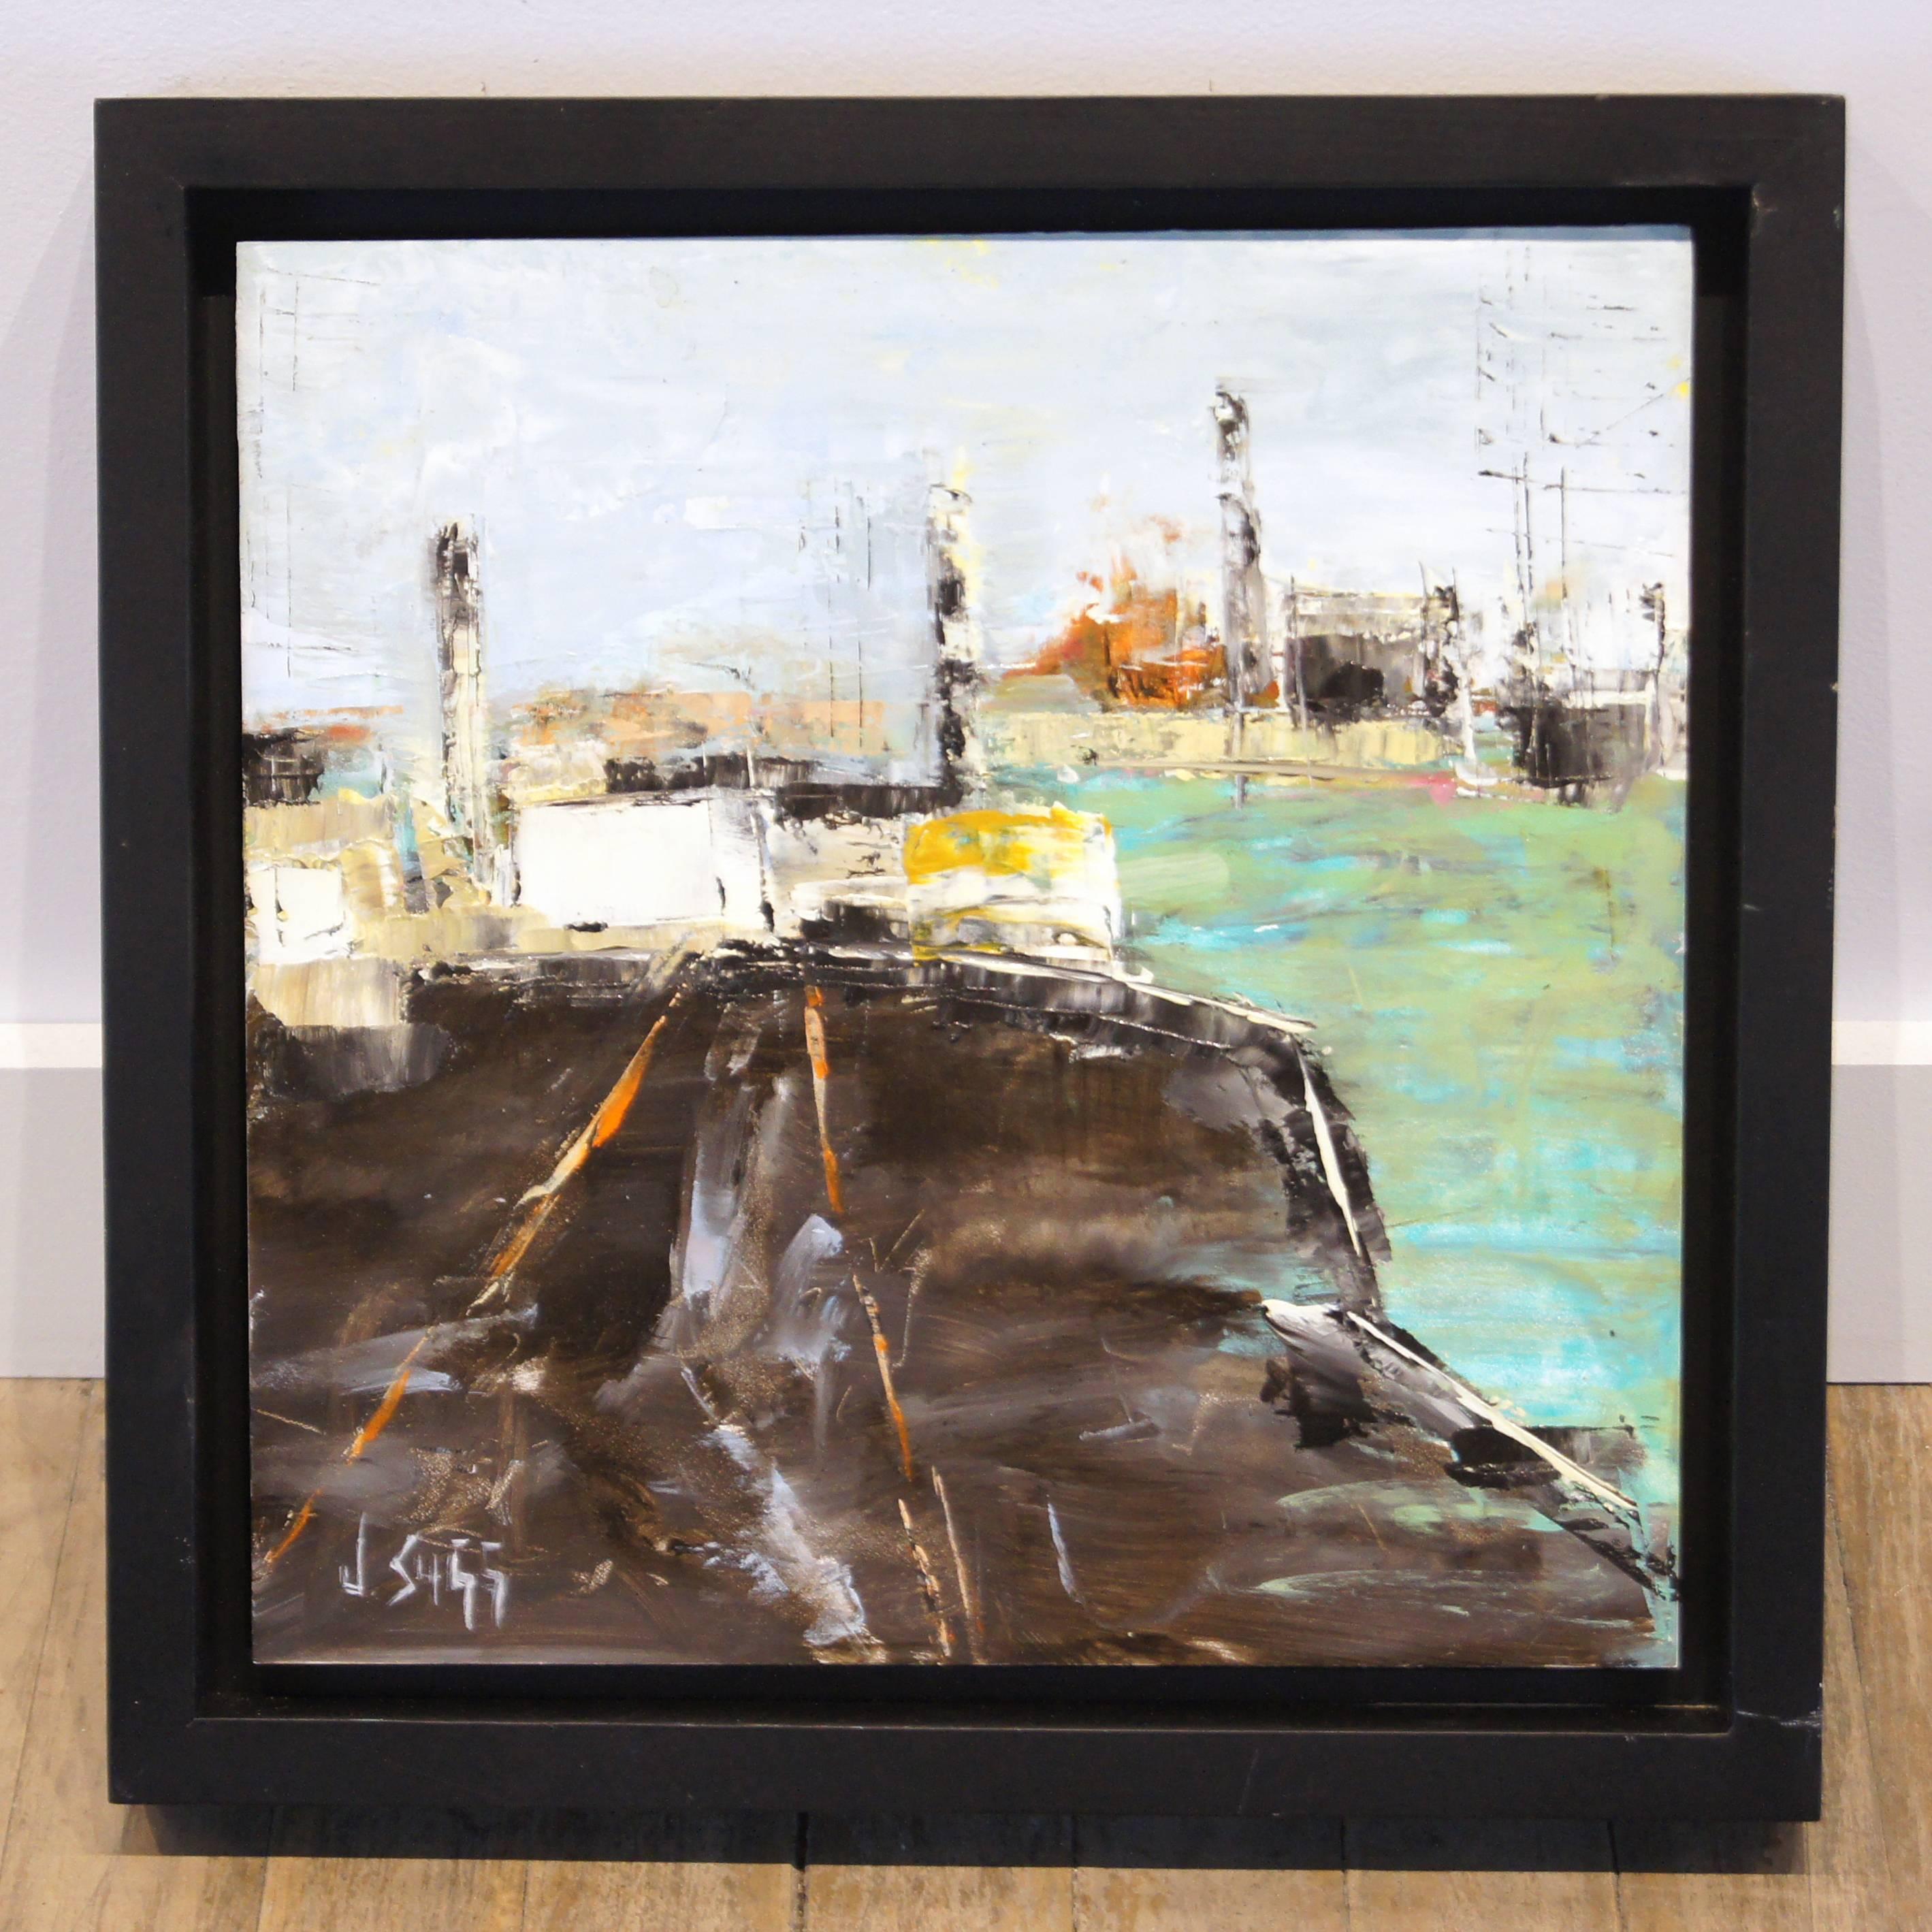 City Pier - Contemporary Cityscape Painting Abstract City Art Urban Life Artwork - Brown Abstract Painting by Janice Sugg